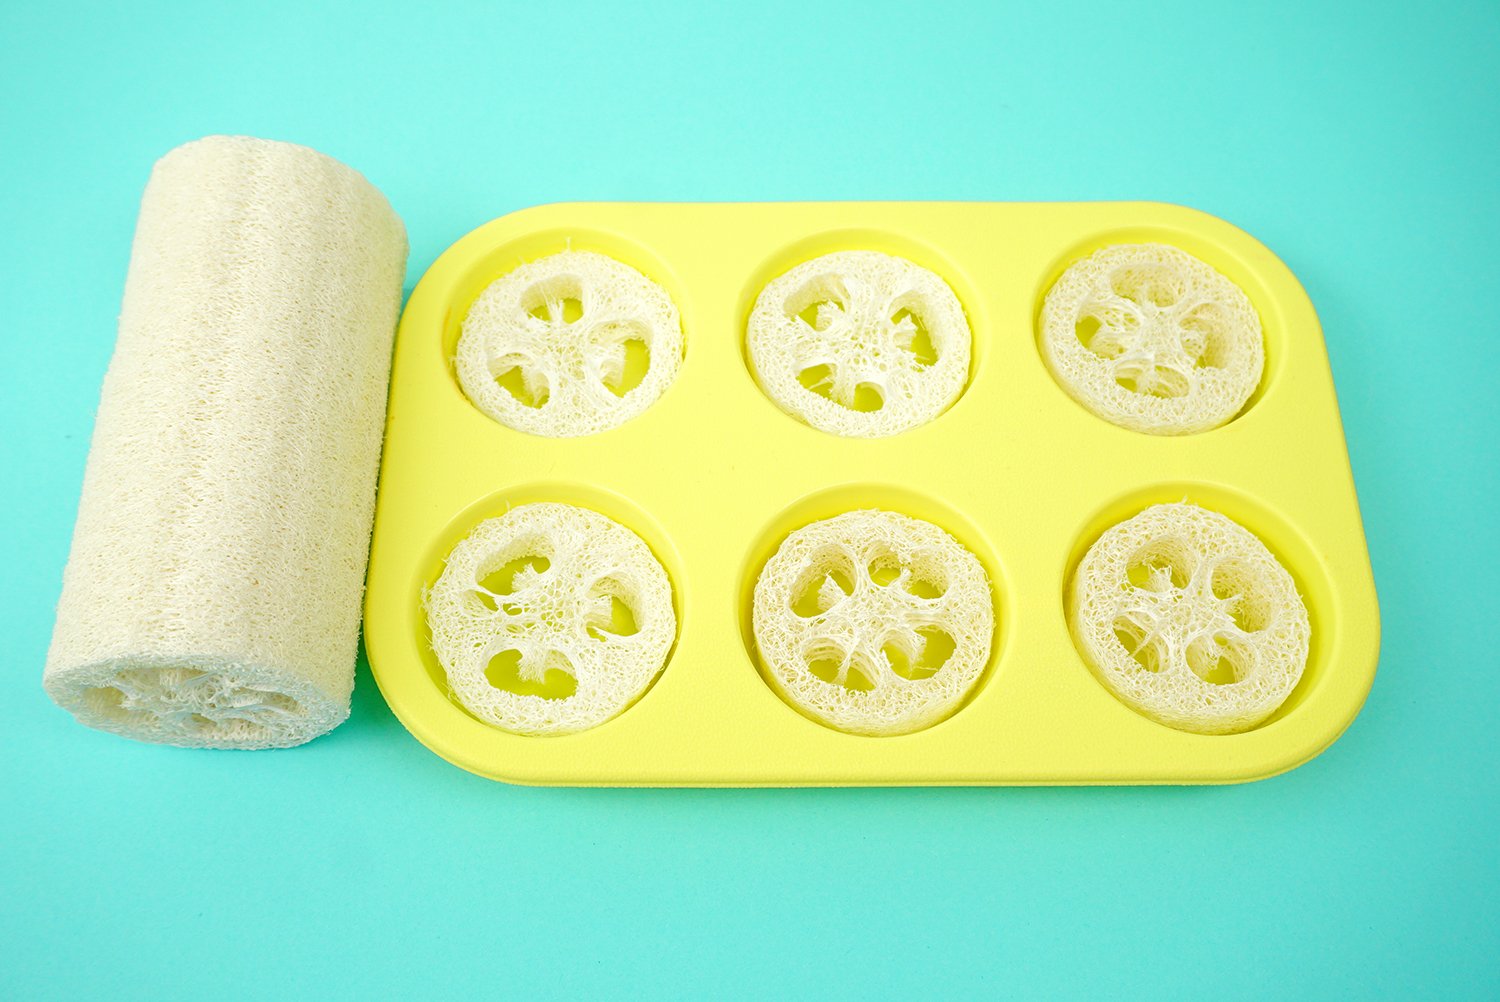 citrus loofah soaps poured in molds